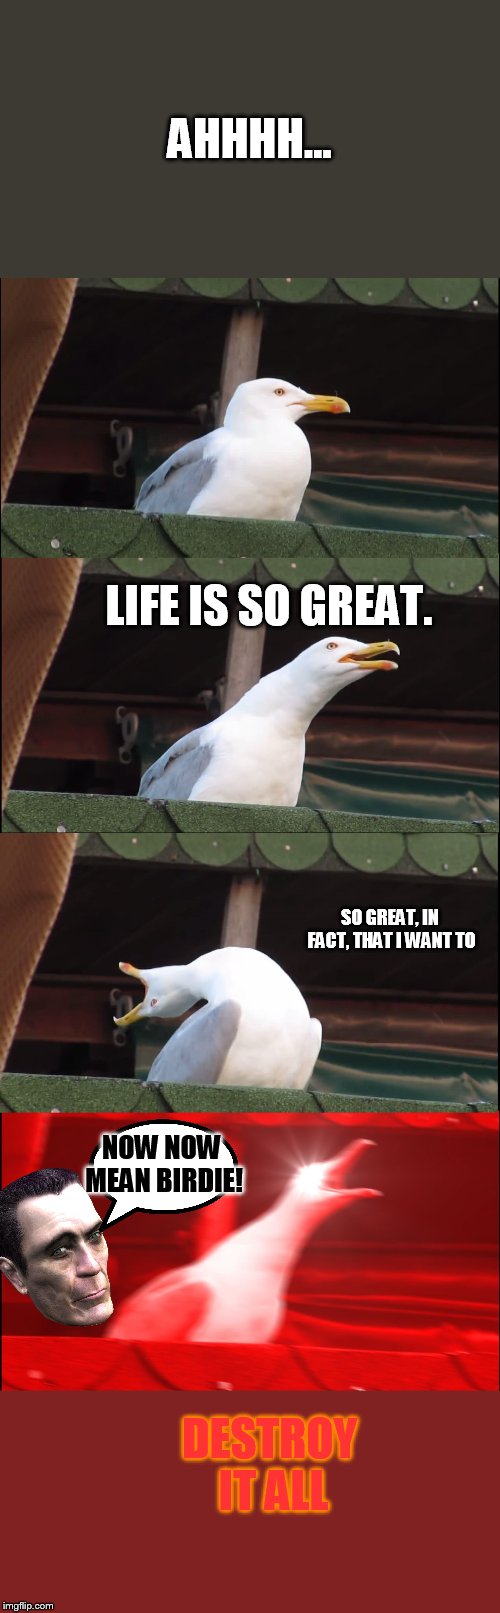 Destruction gull Vs. The G-man! | AHHHH... LIFE IS SO GREAT. SO GREAT, IN FACT, THAT I WANT TO; NOW NOW MEAN BIRDIE! DESTROY IT ALL | image tagged in memes,inhaling seagull,g-man,end of the world | made w/ Imgflip meme maker